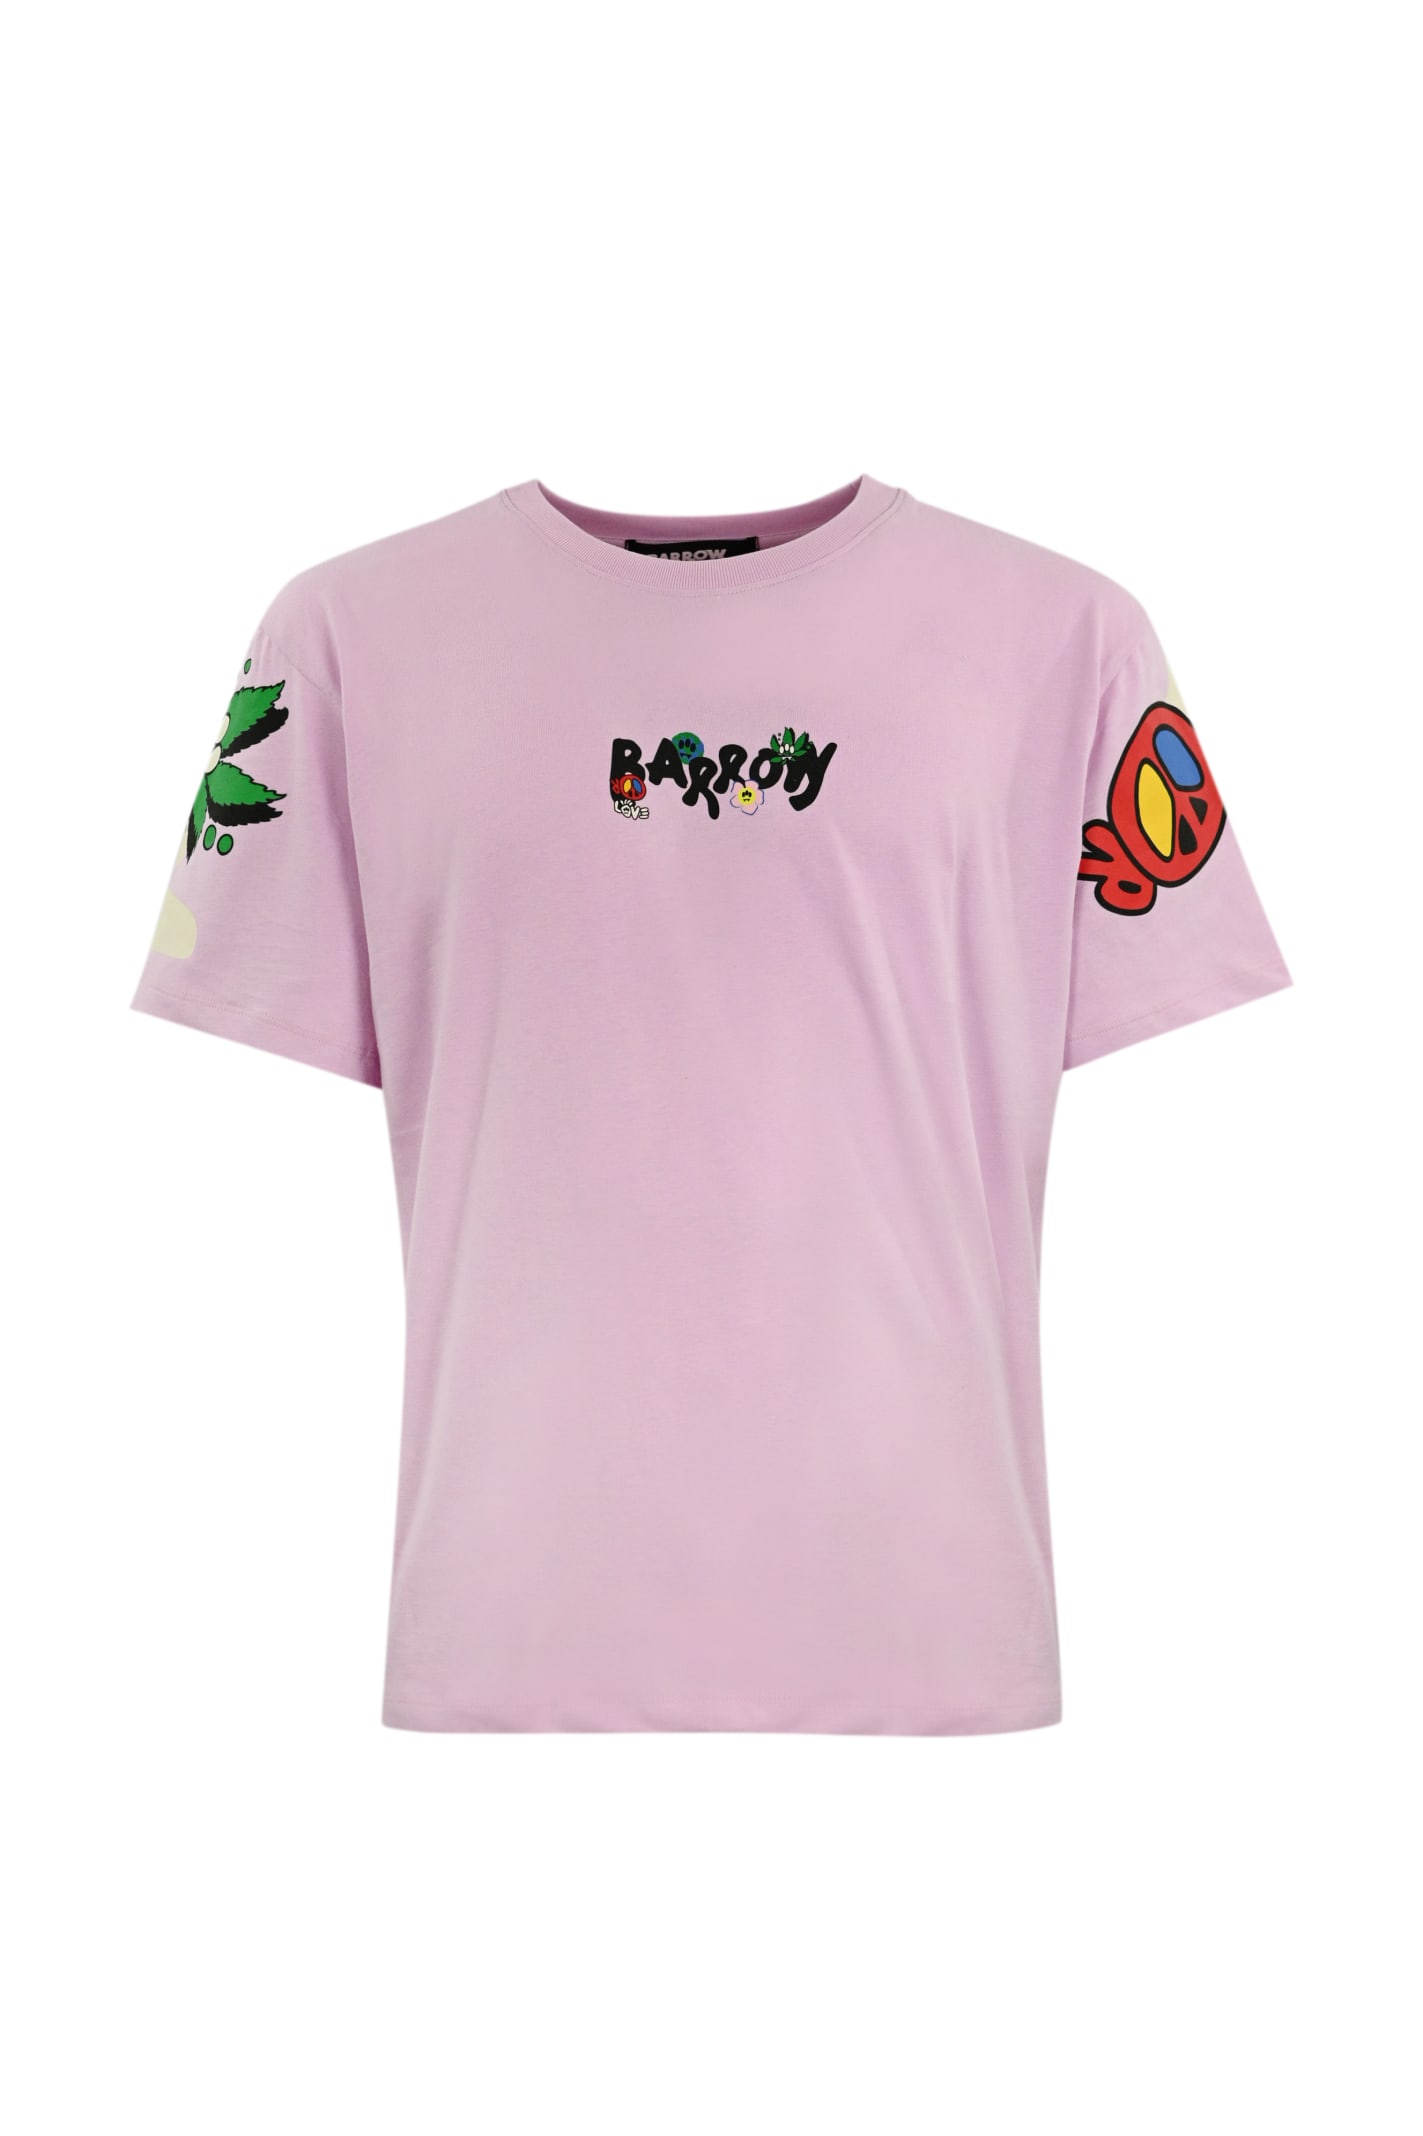 BARROW COTTON T-SHIRT WITH GRAPHIC PRINT